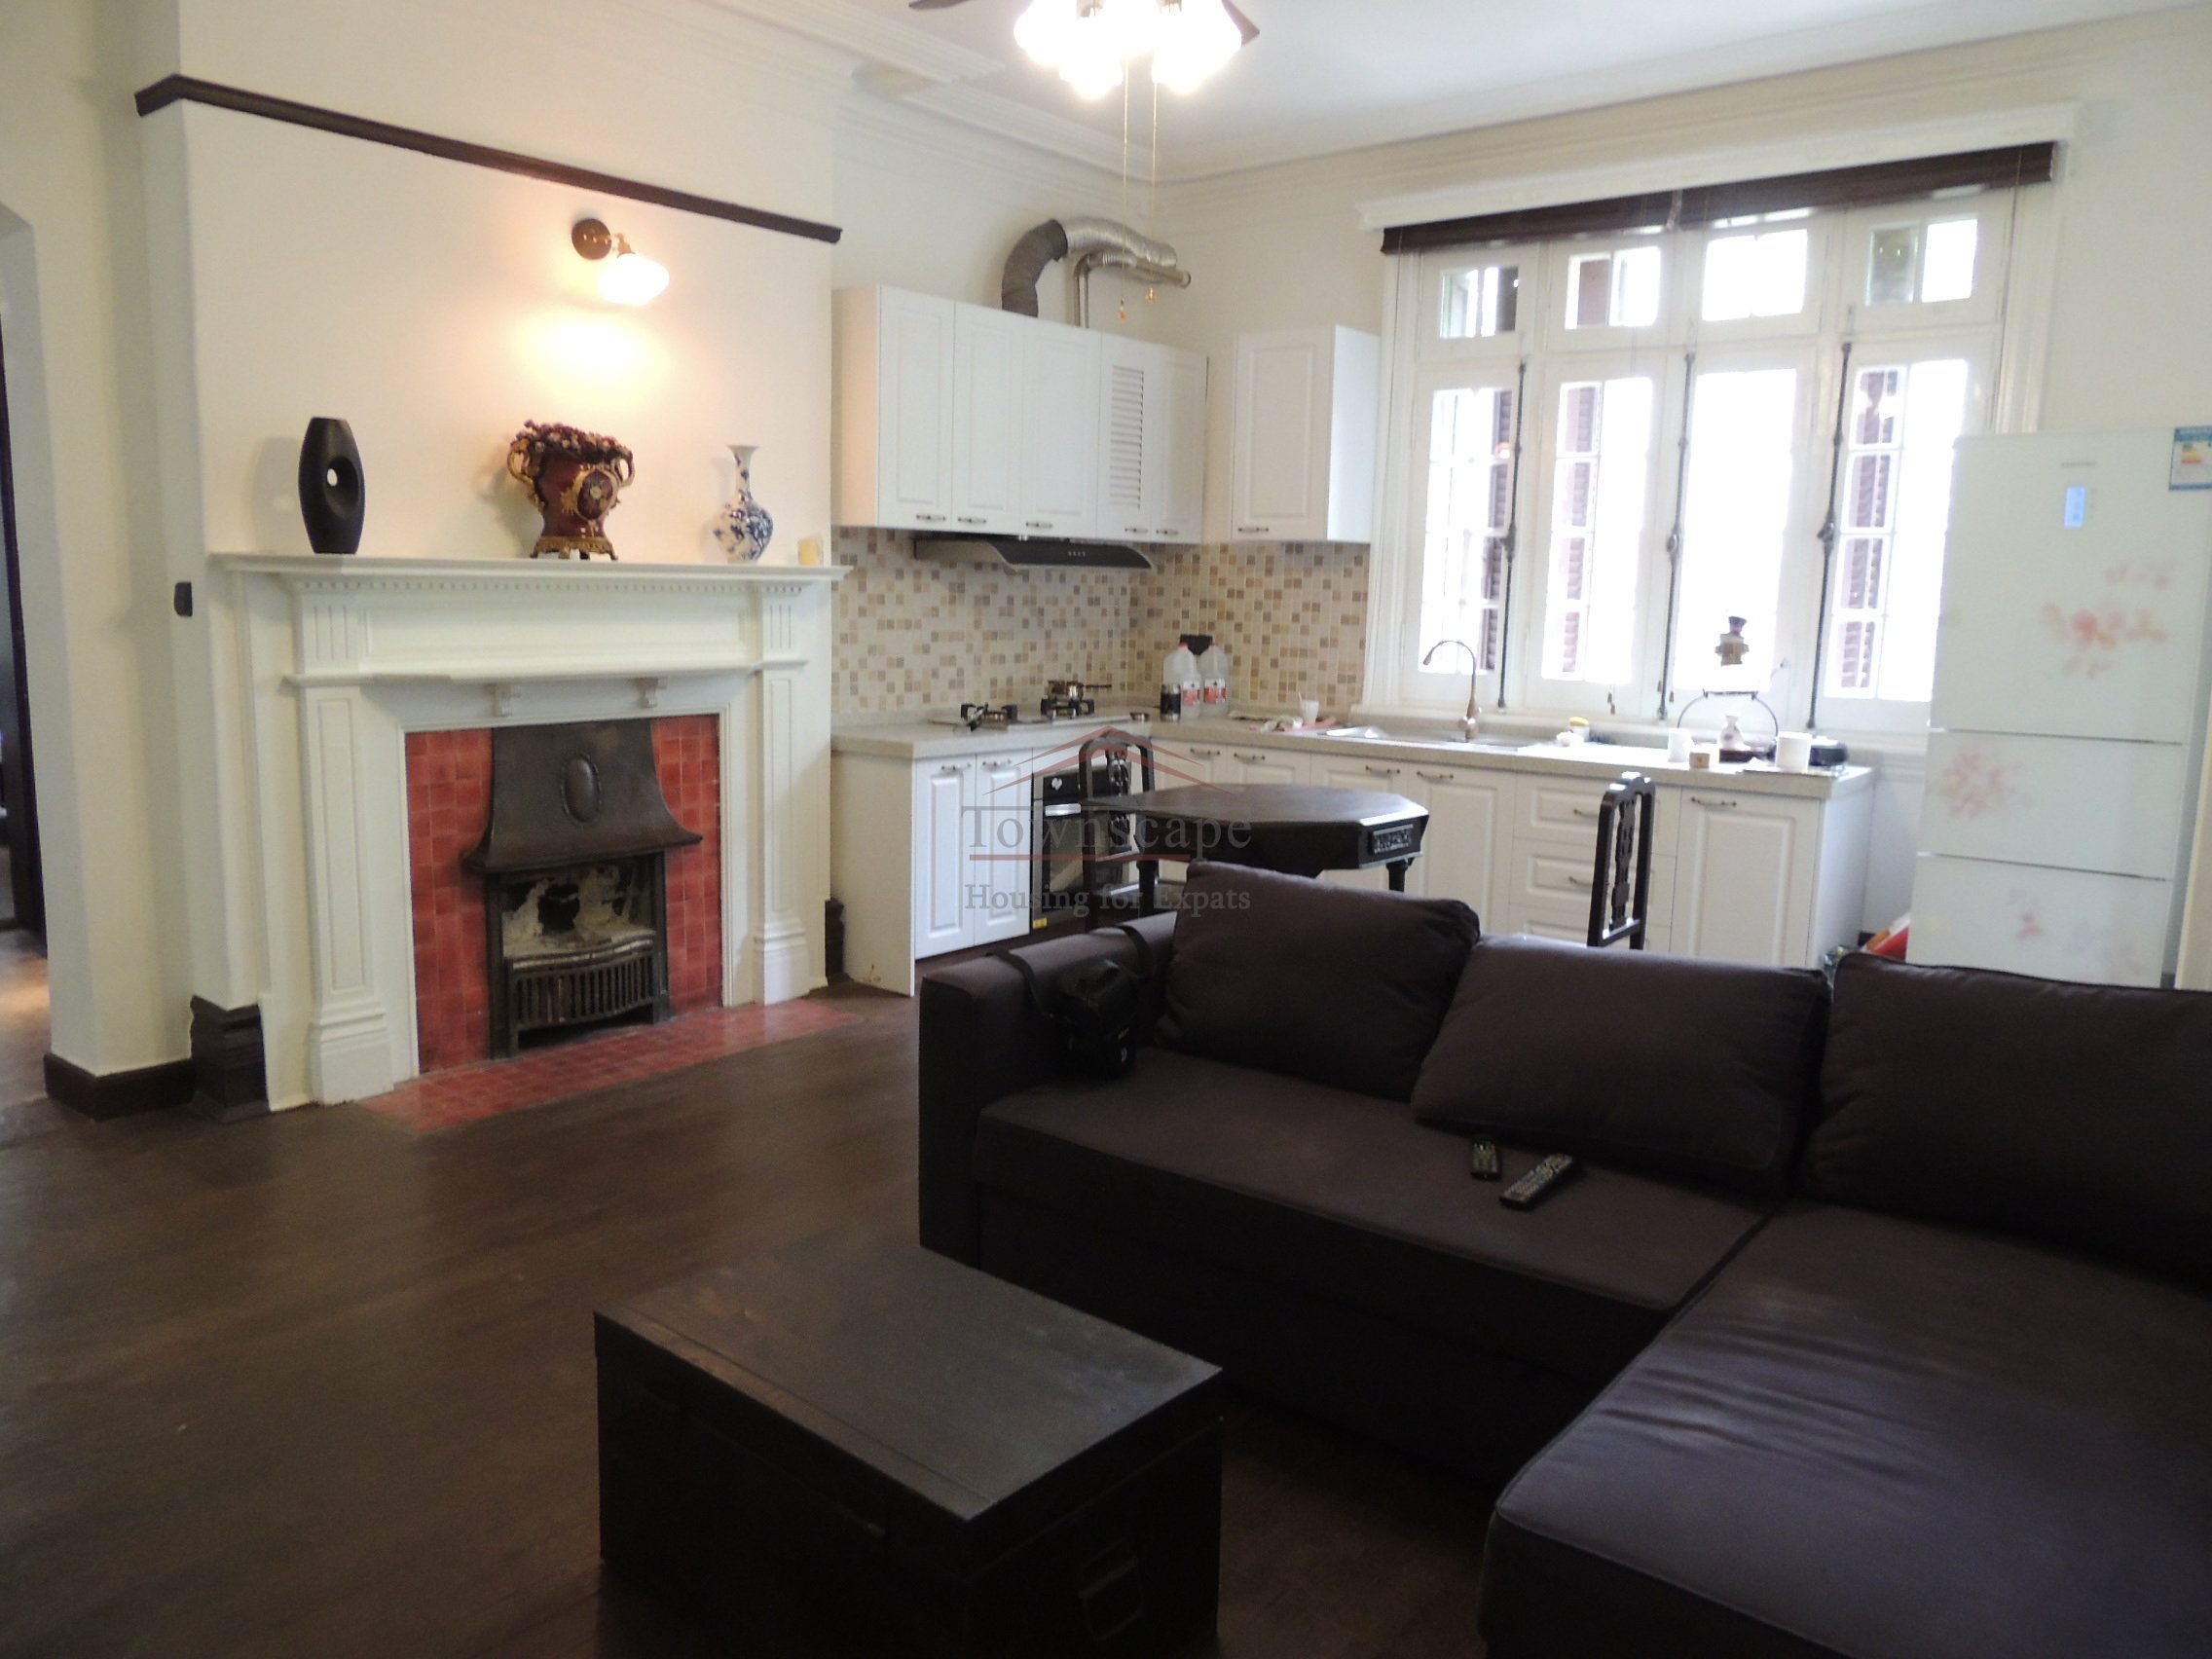 Rent in Shanghai Fantastic 3 Bed Lane House on Fuxing road Shanghai French Concession